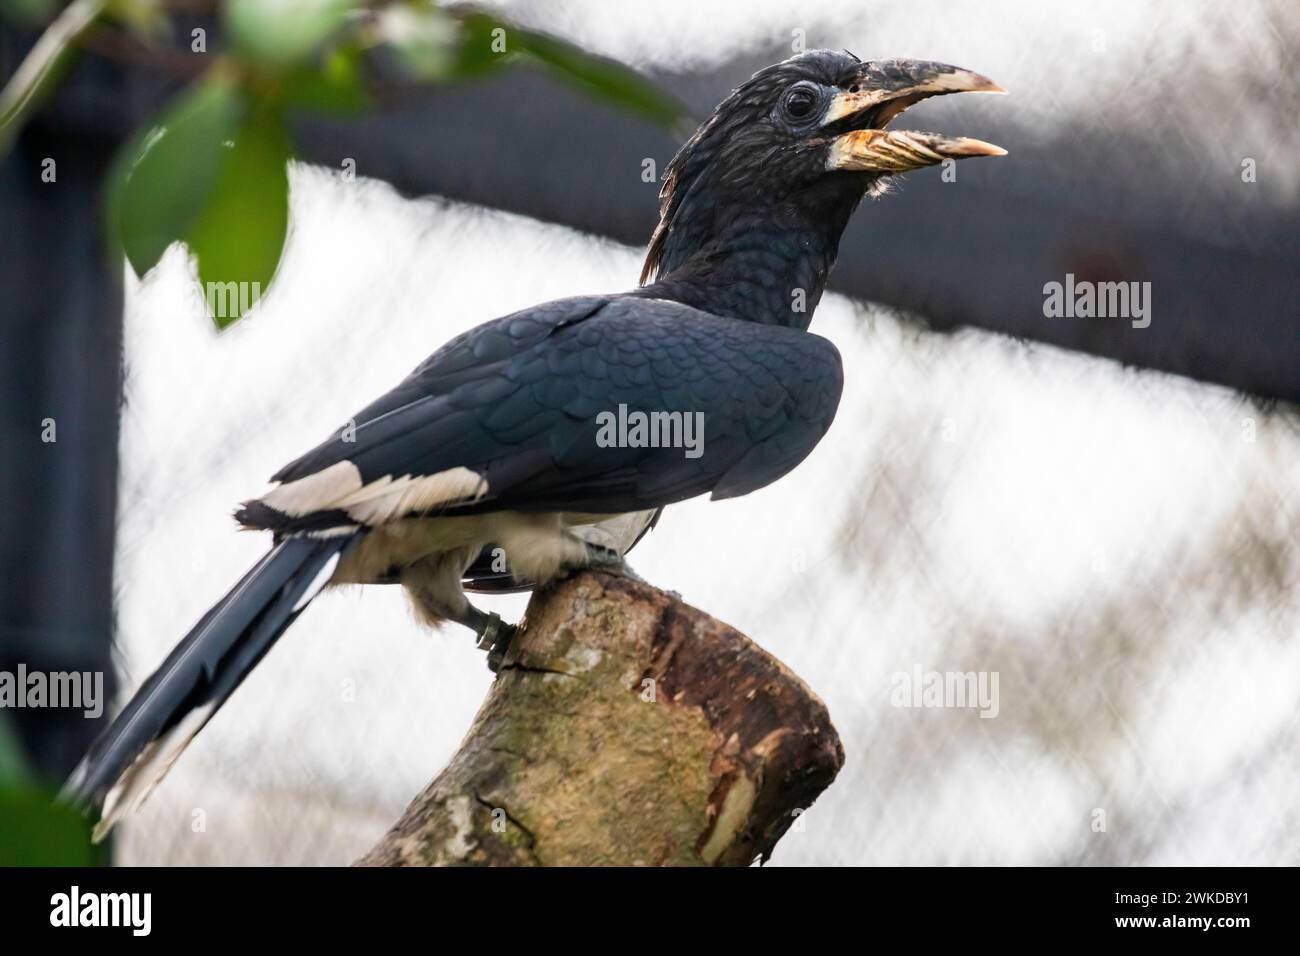 The piping hornbill (Bycanistes fistulator) is a bird in the hornbill family. This black-and-white species is found in humid forest and second growth Stock Photo